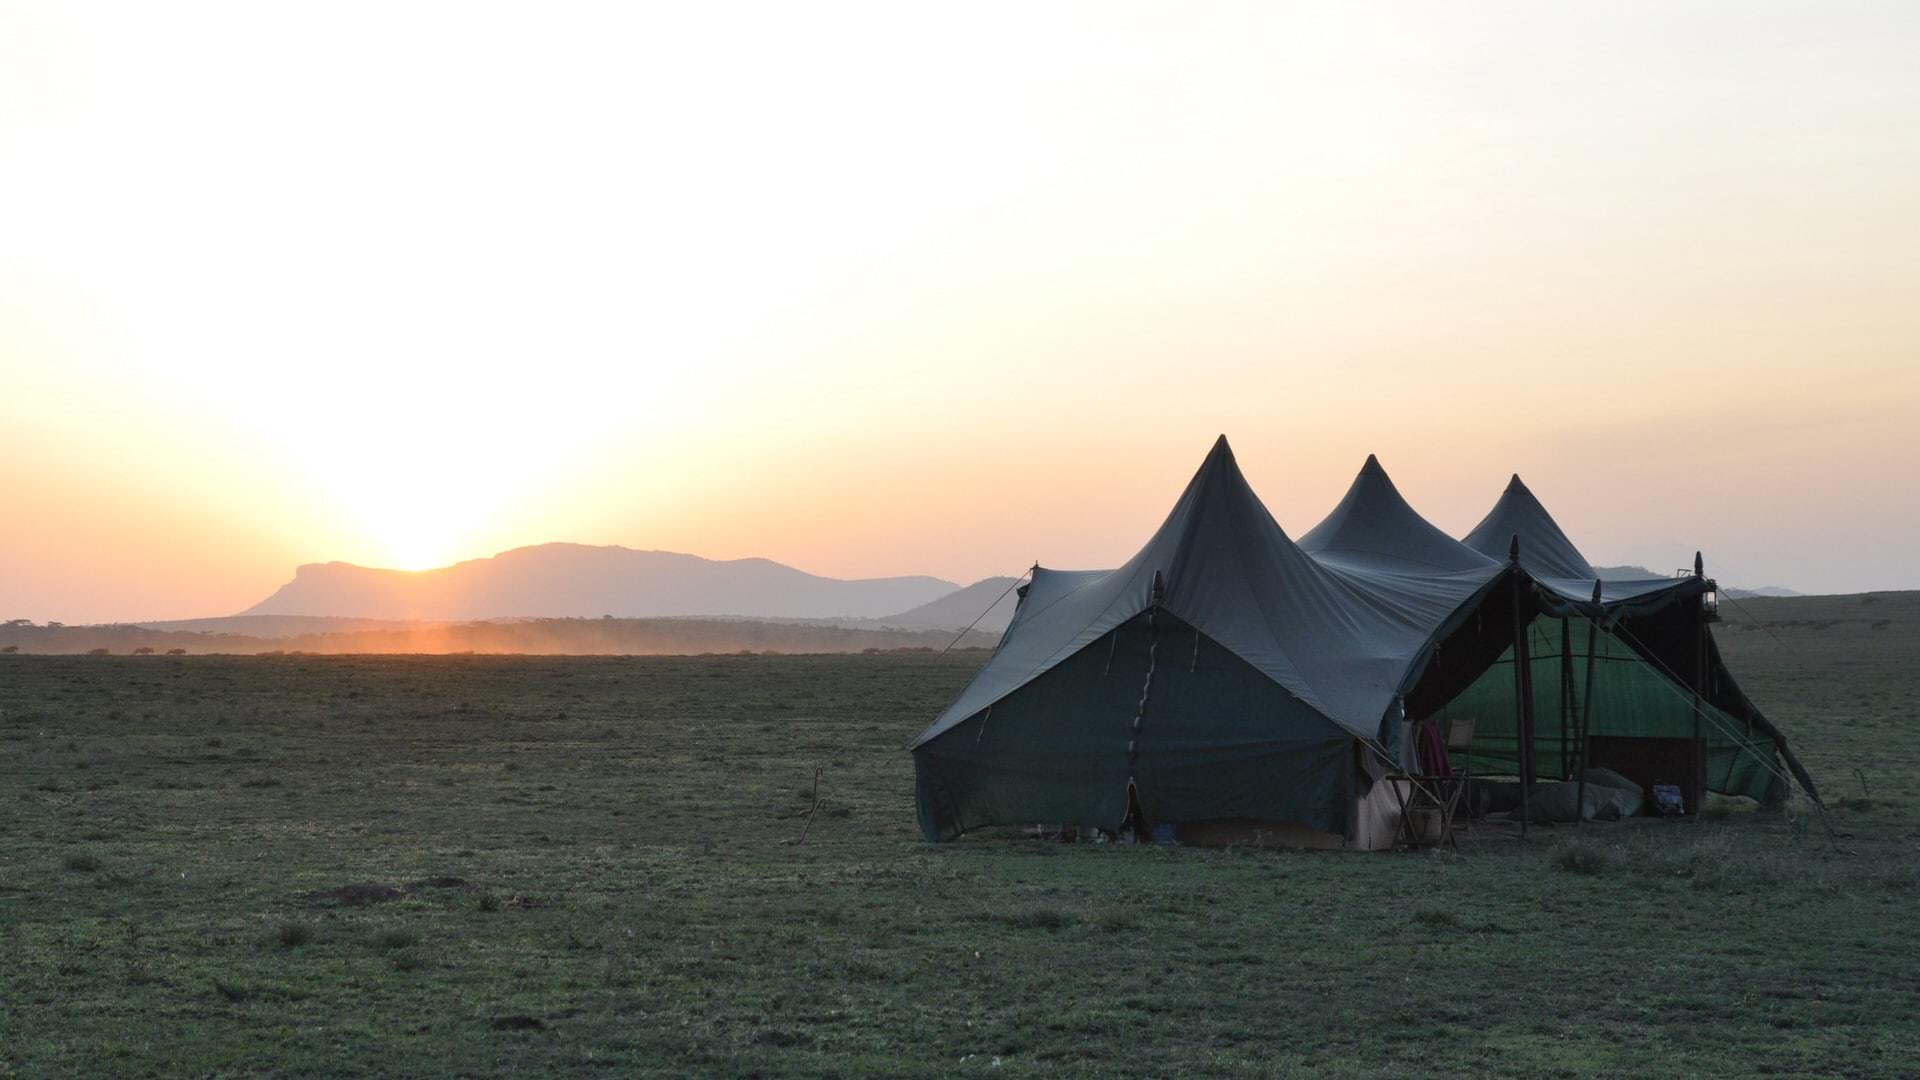 Mobile tented camp mess on the Serengeti plains at sunset